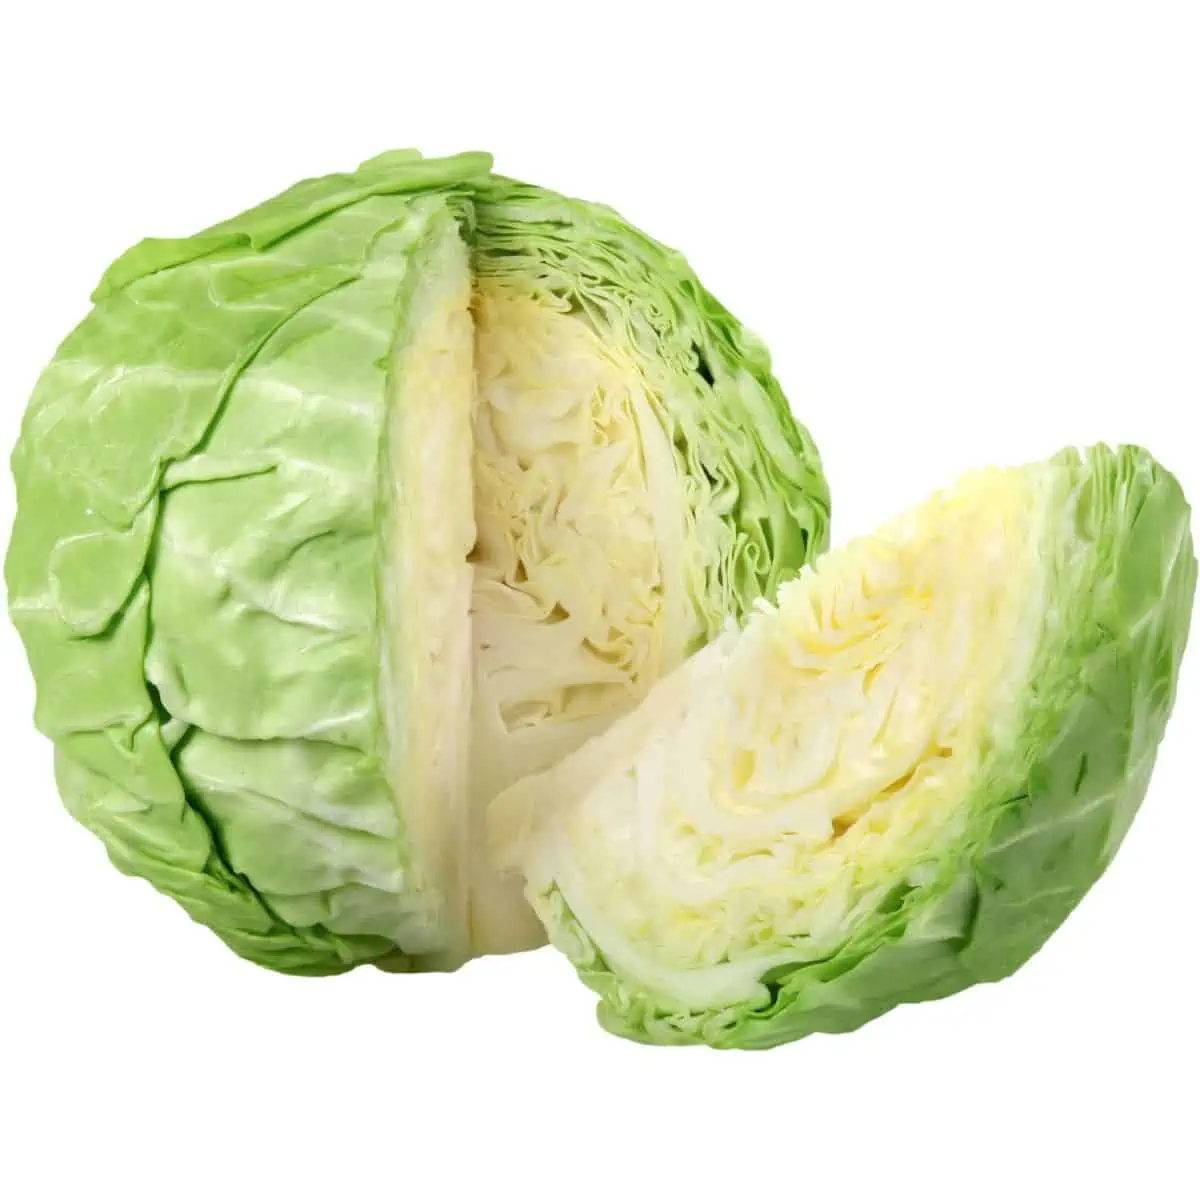 A head of green cabbage with a wedge cut out lying next to it.